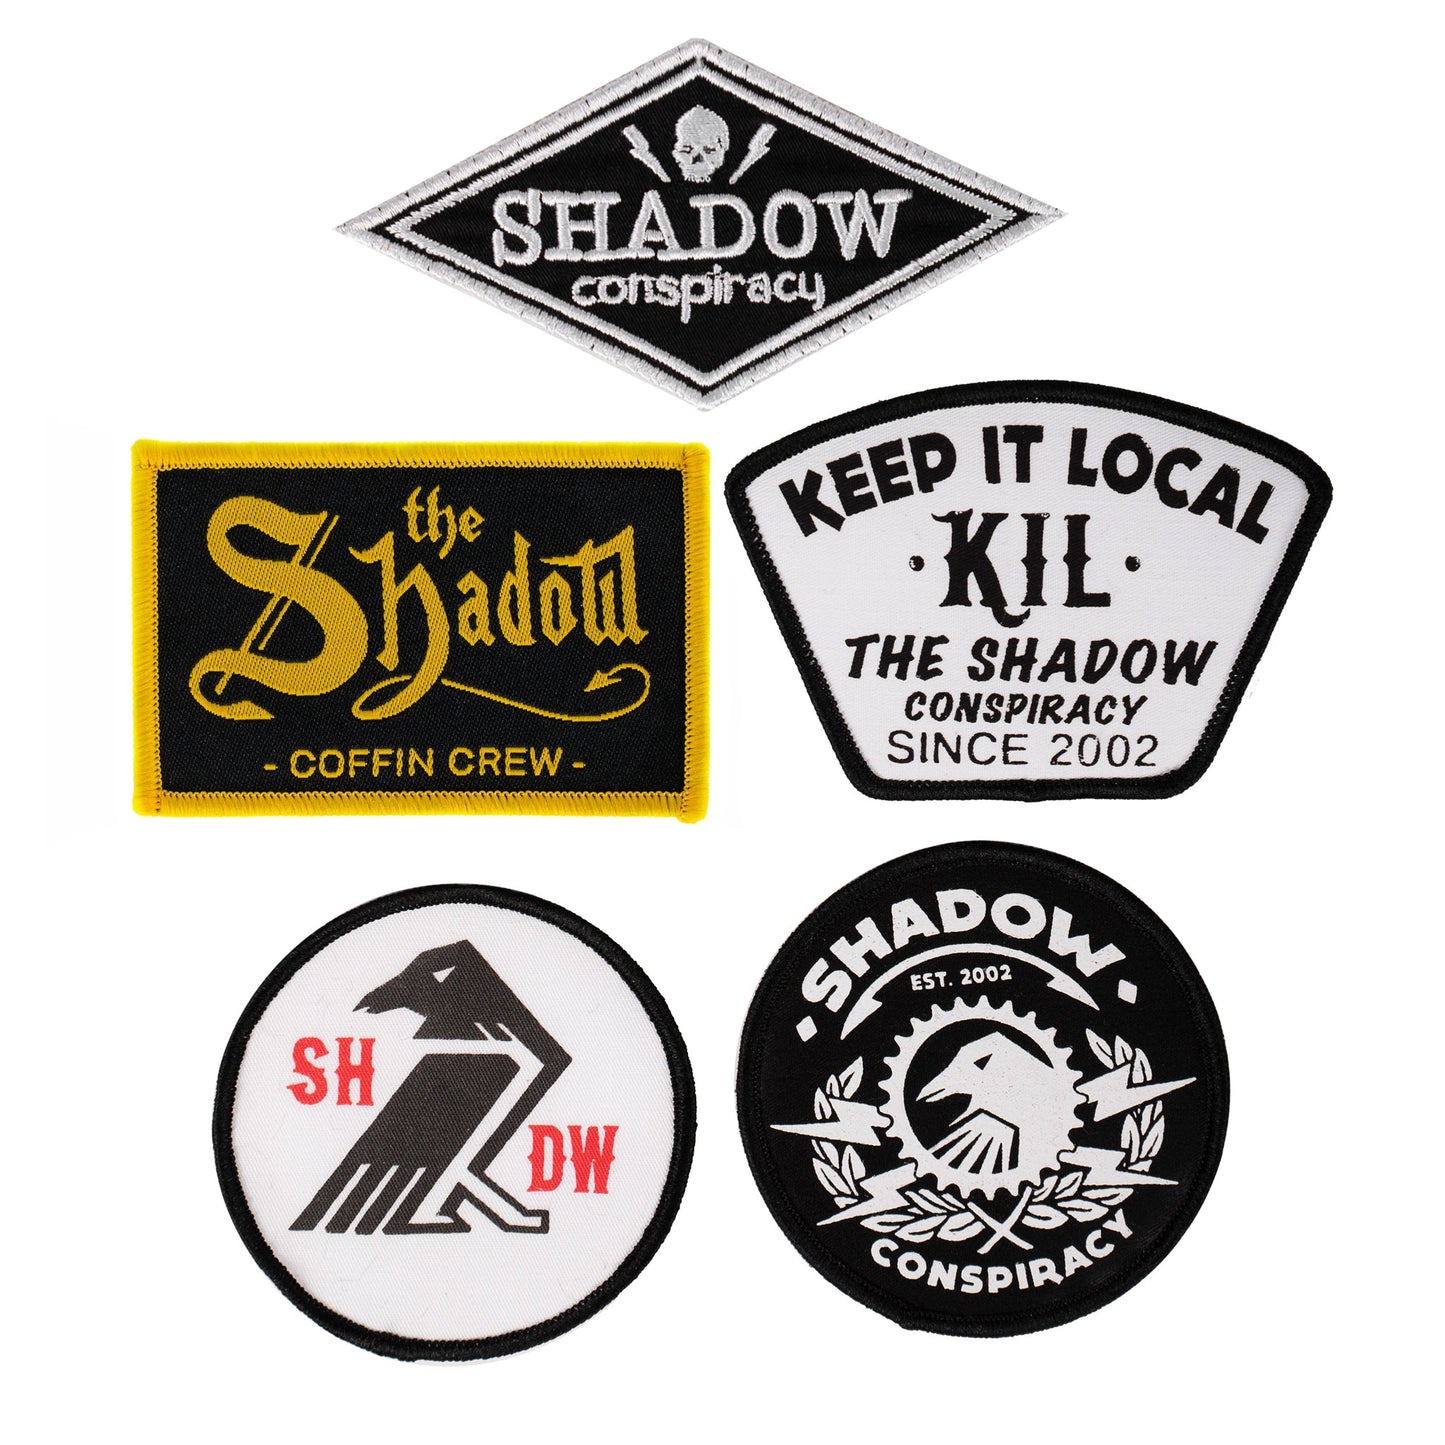 SHADOW Vintage Patch Kit (5 pack) - Sparkys Brands Sparkys Brands  Merch, Patches, The Shadow Conspiracy bmx pro quality freestyle bicycle